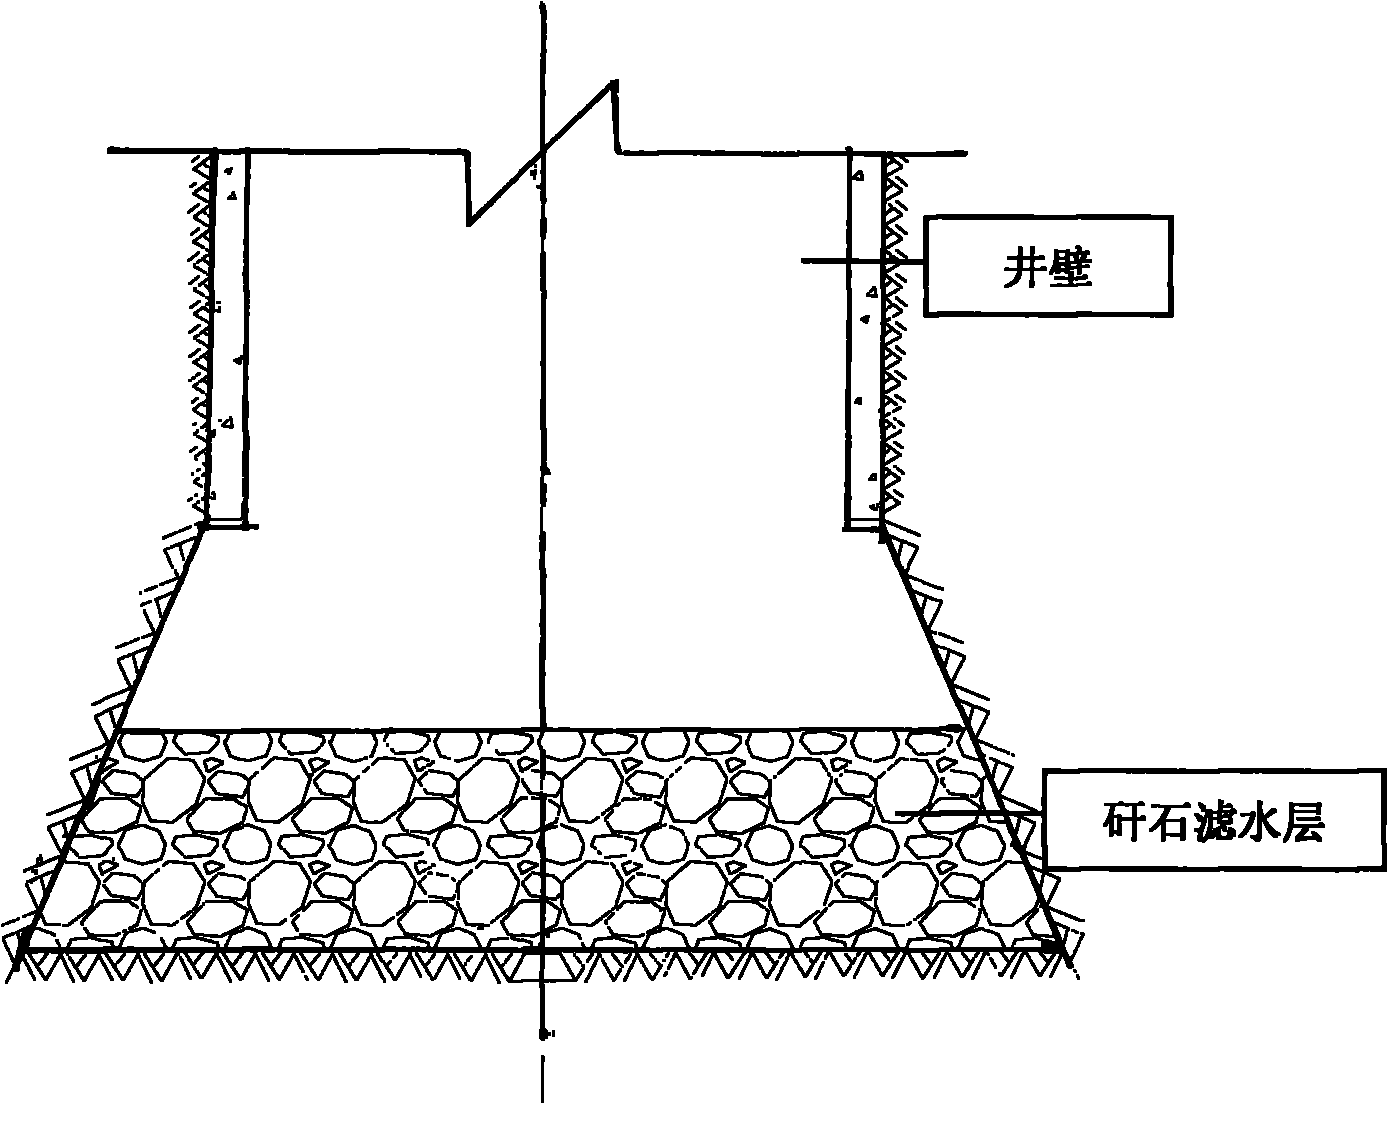 Grout stop pad construction method for kilometer vertical shaft grouting for water control